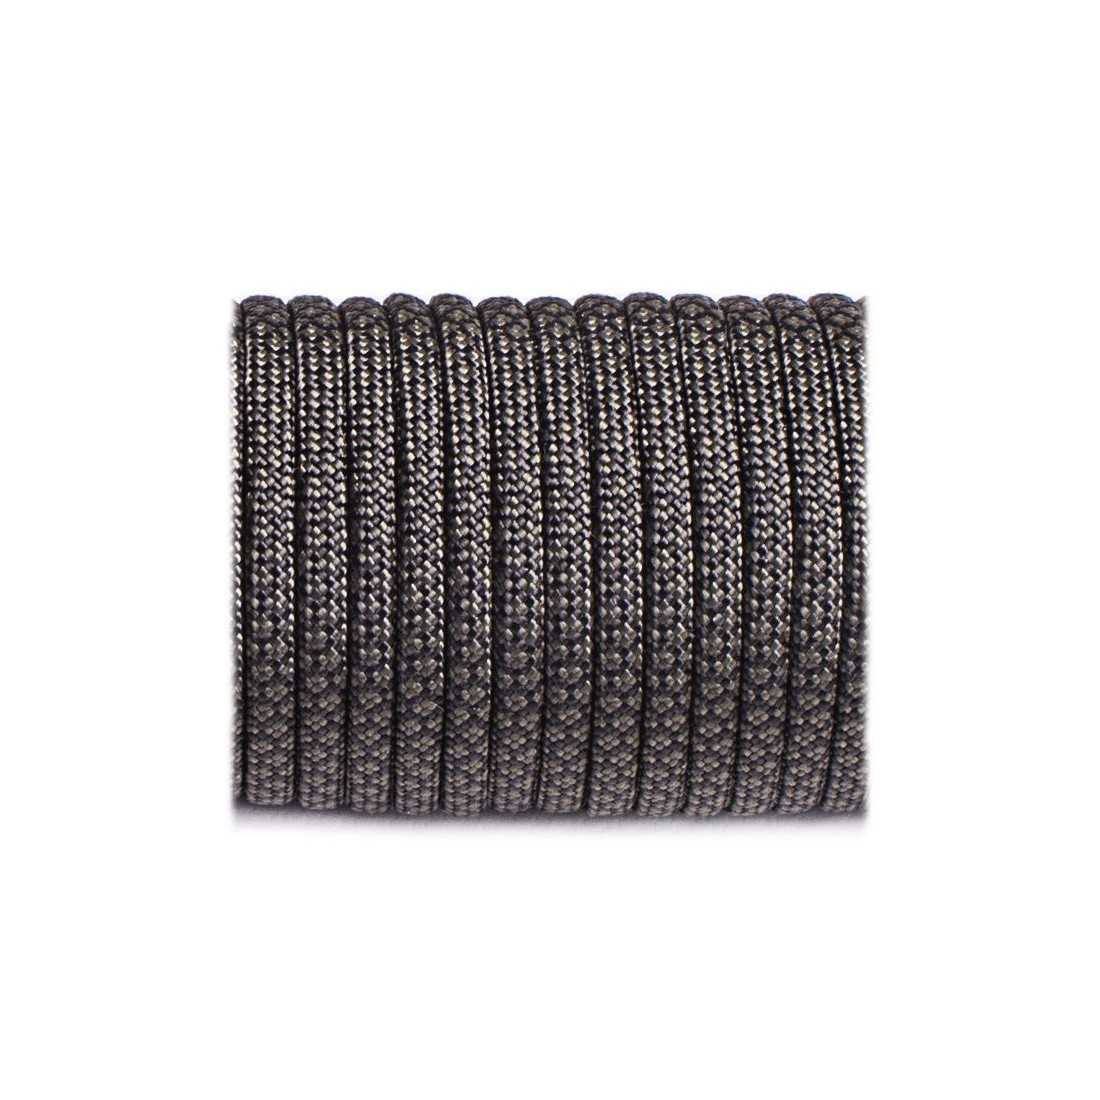 Paracord Type III 550 Army Green Snake #335